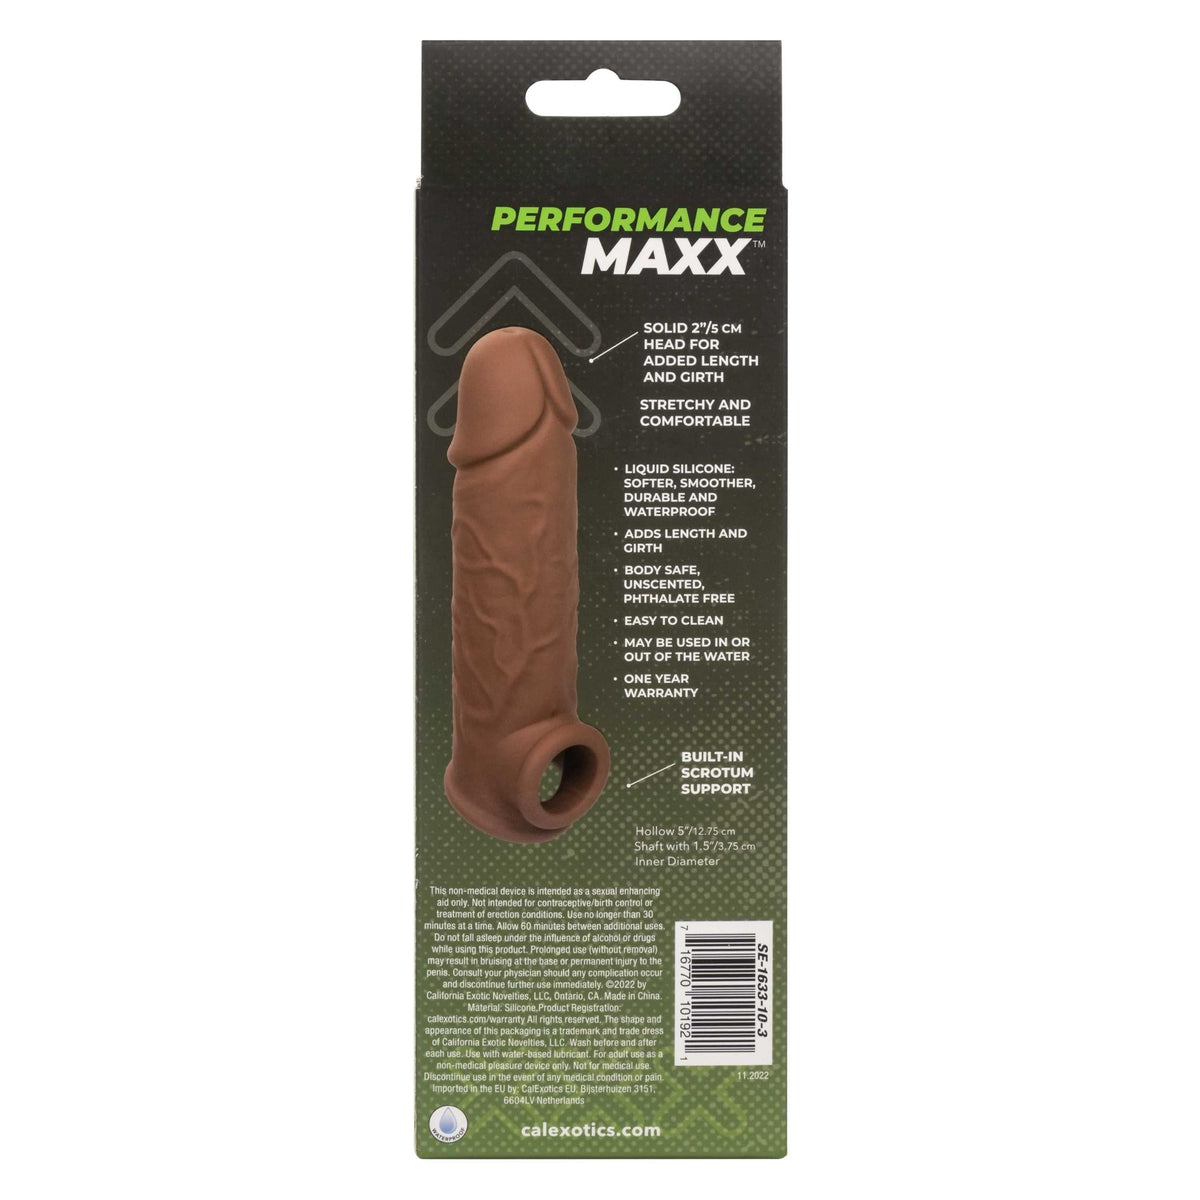 performance maxx life like extension 7 inch brown